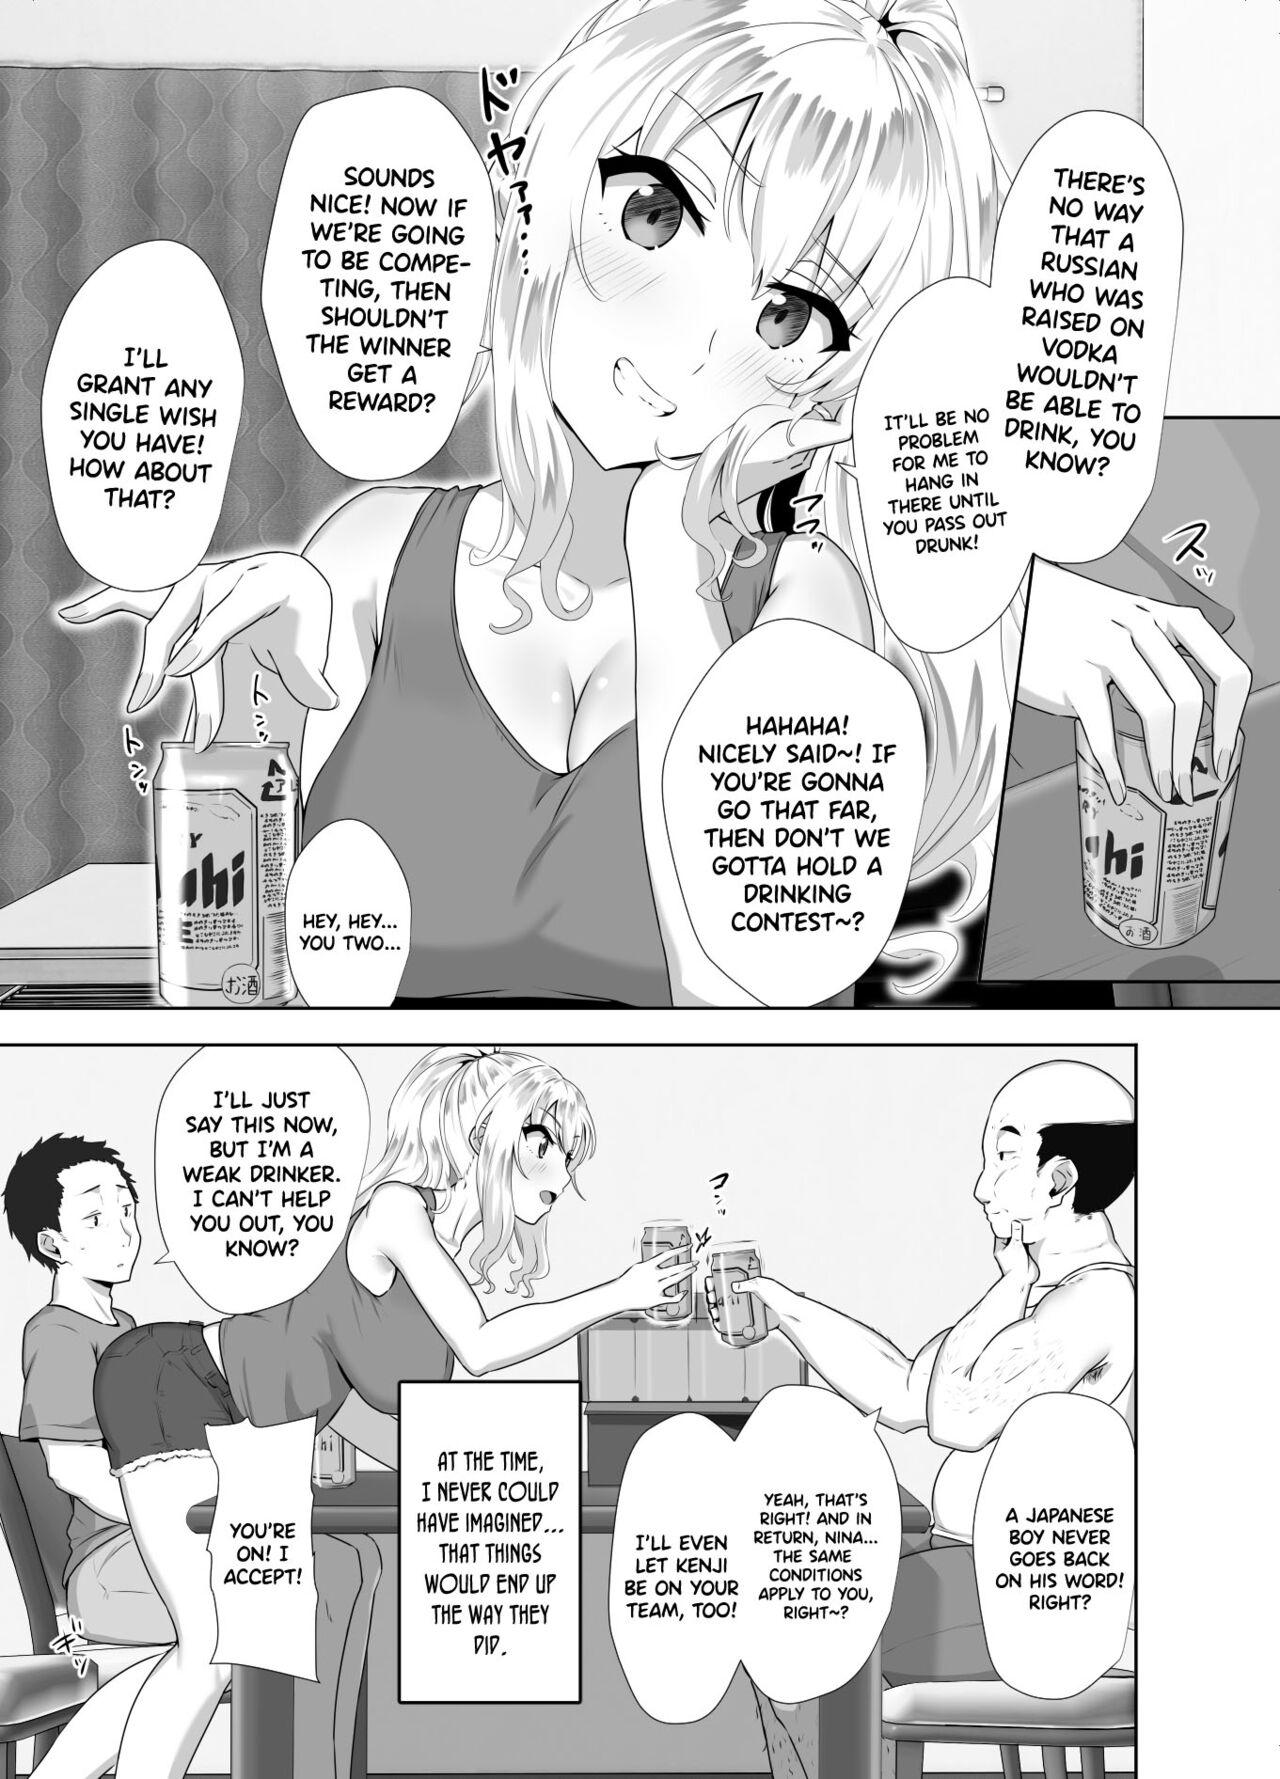 Play Russia-jin ga Osake de Nihonjin ni Makeru Wakenai Deshou? | There's No Way a Russian Could Lose to a Japanese Person In Drinking, Right? - Original Shaved Pussy - Page 6